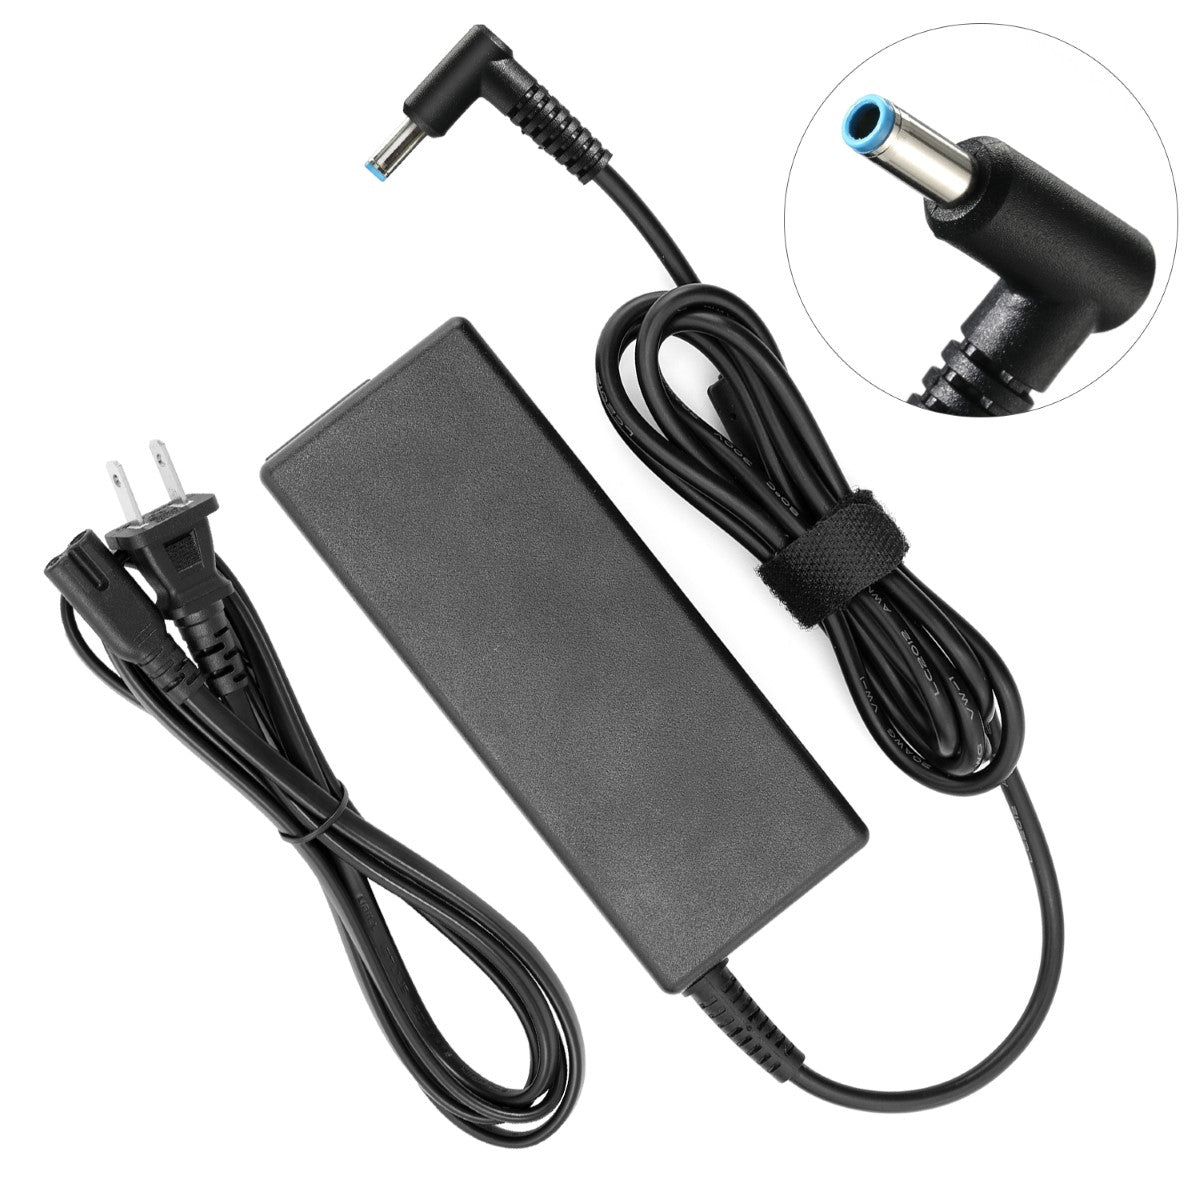 Charger for HP ProBook 650 G2 Laptop